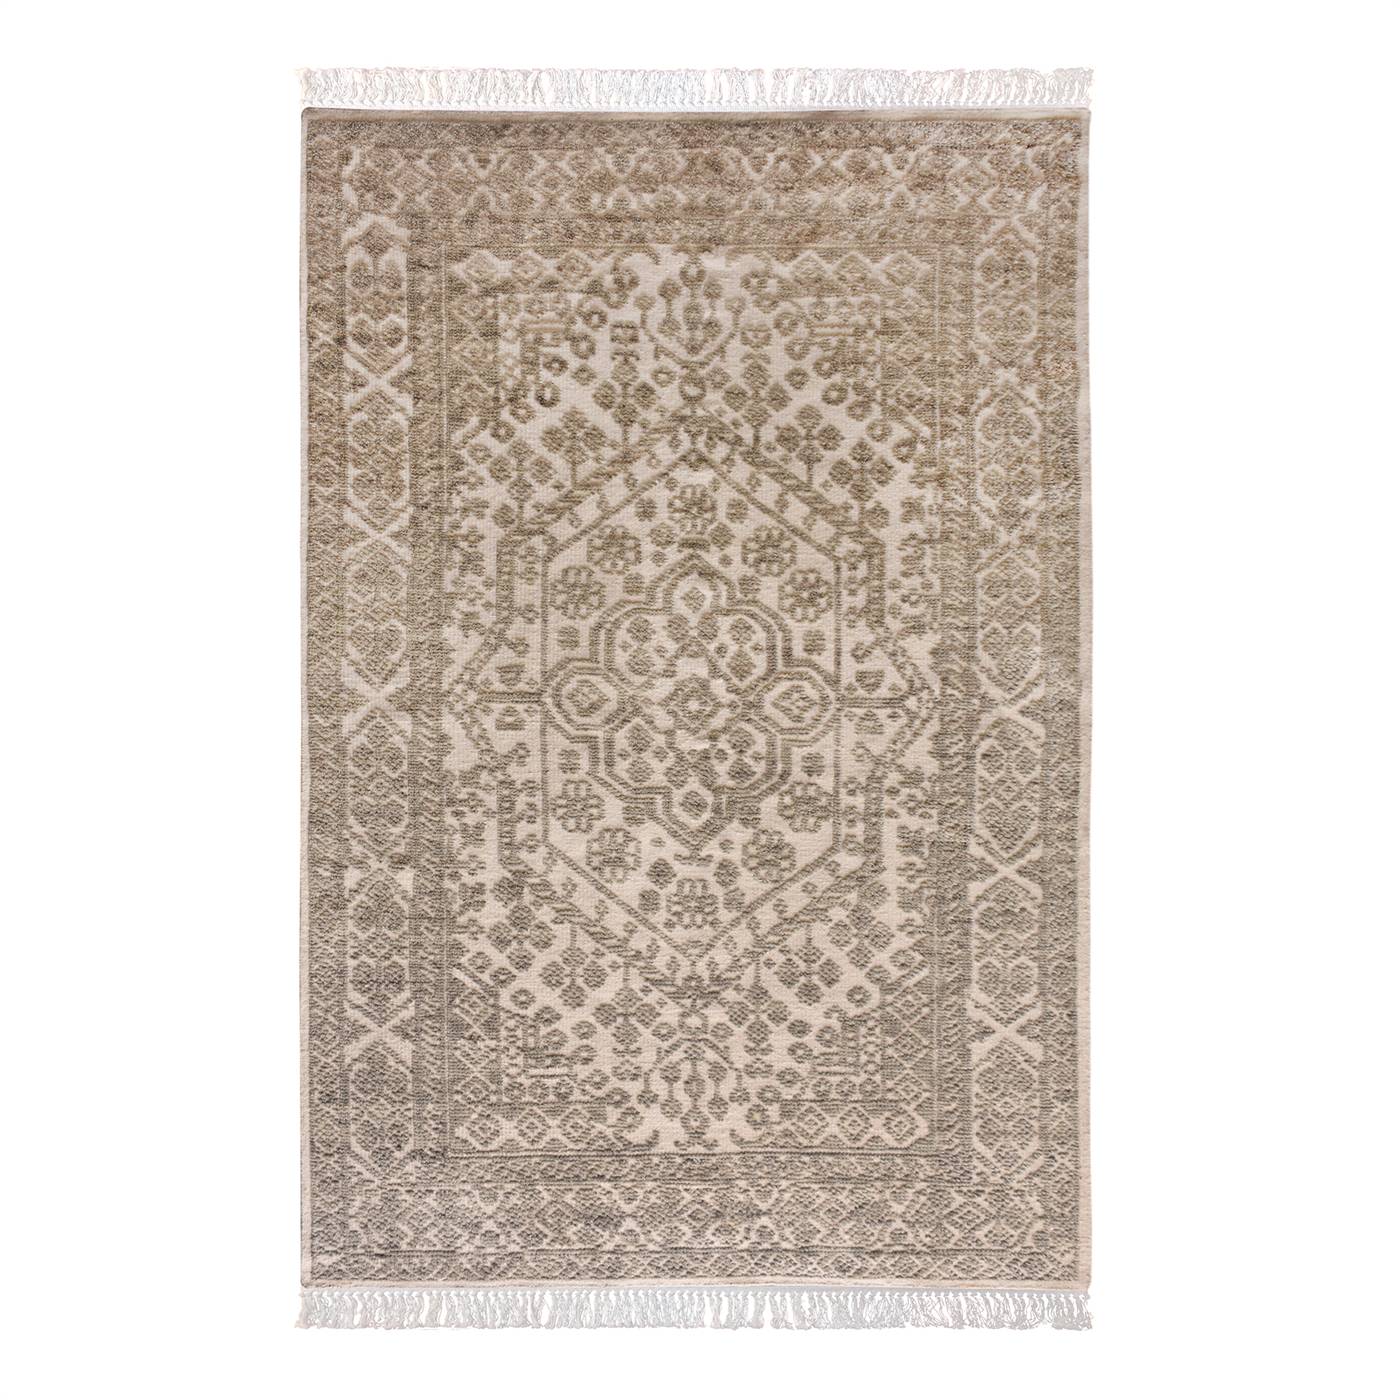 Area Rug, Bedroom Rug, Living Room Rug, Living Area Rug, Indian Rug, Office Carpet, Office Rug, Shop Rug Online, Grey, Wool, Hand Knotted , Handknotted, All Cut, Contemporary 